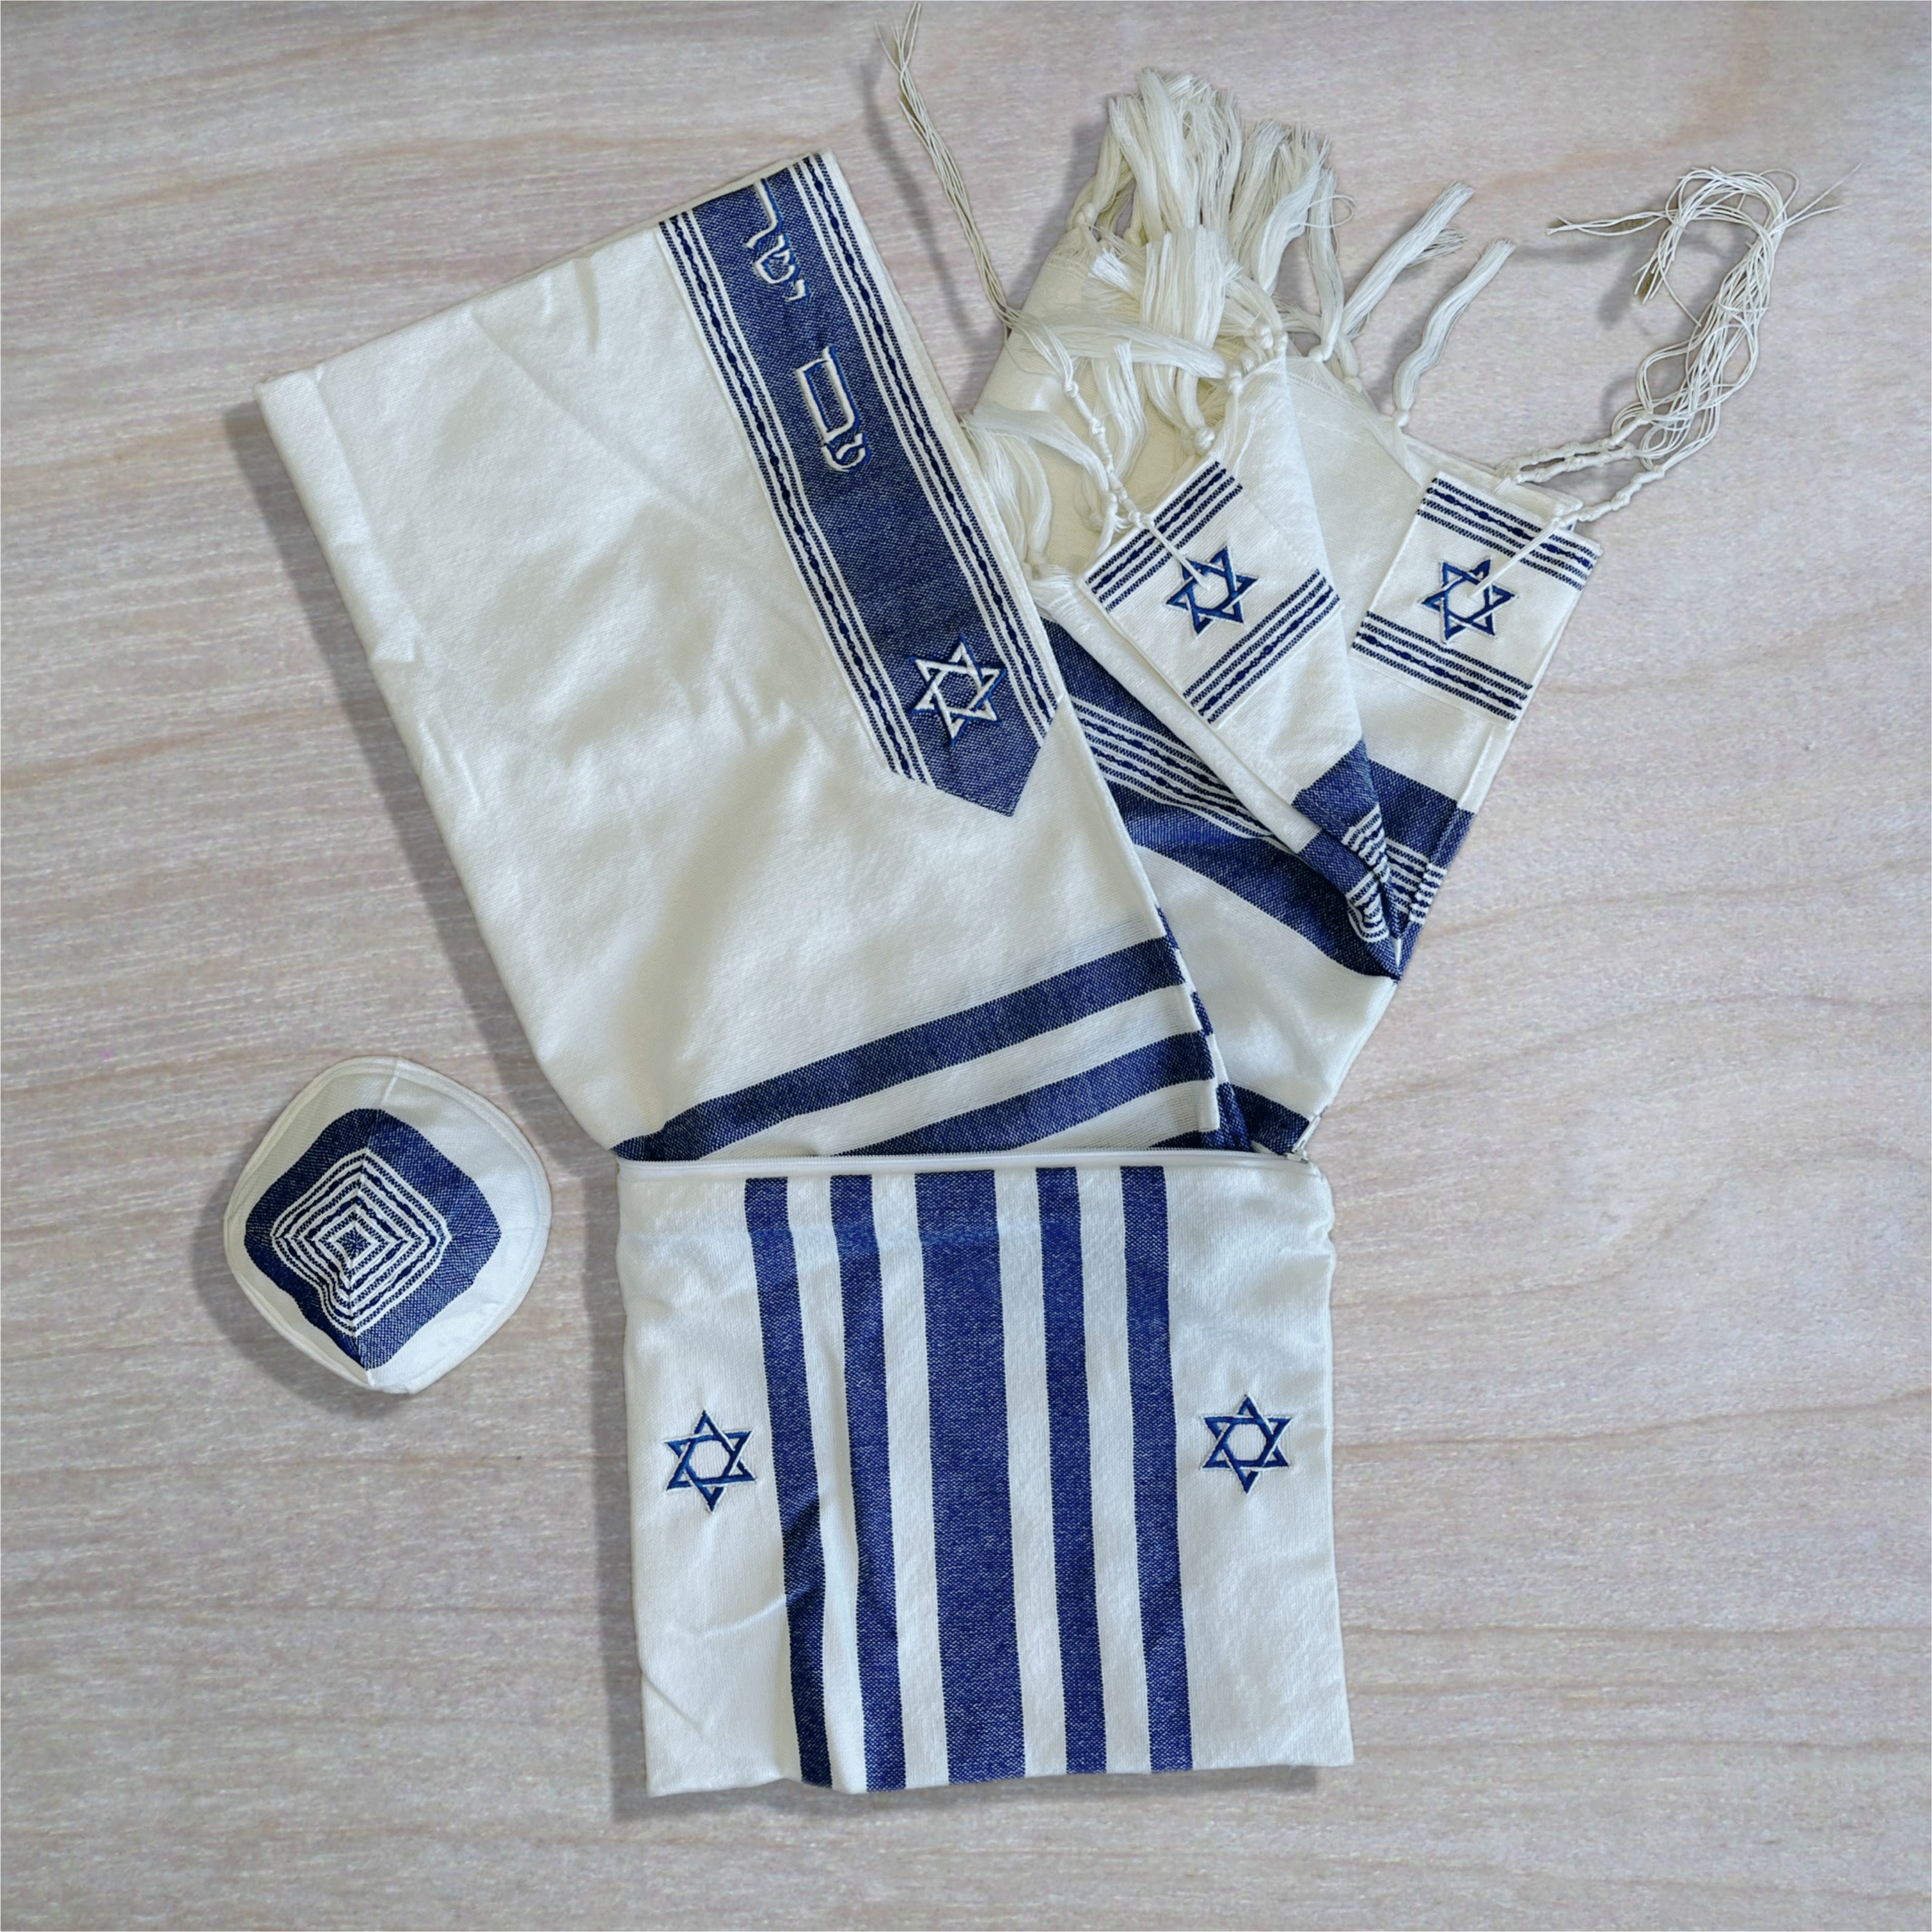 Special Edition “Am Israel Chai” Wool Tallit - blue on white